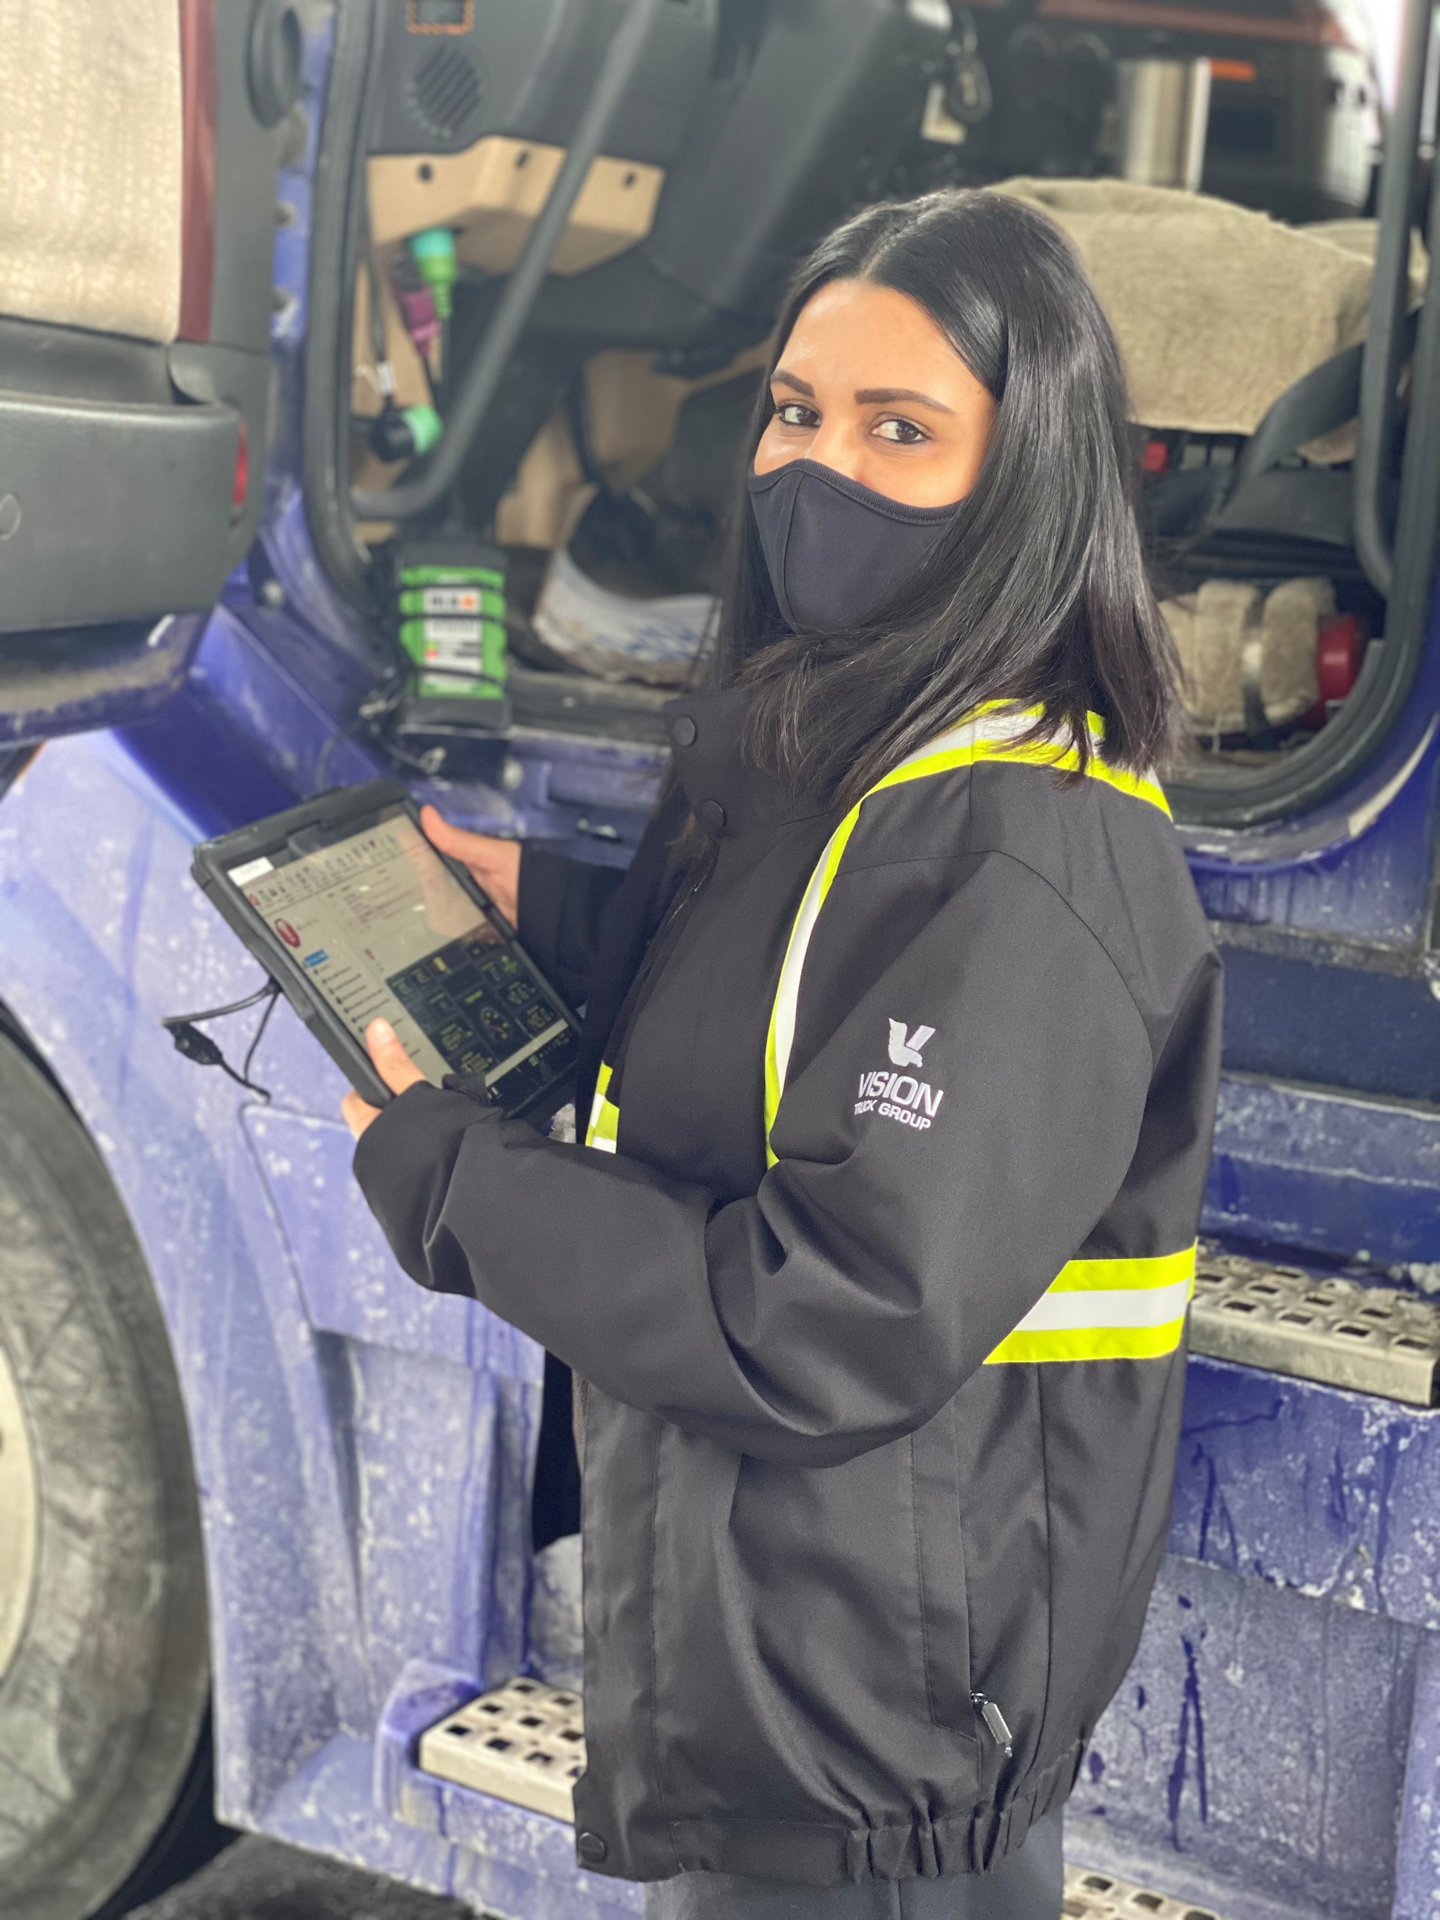 Through ASIST, the case is also assigned on an iPad to a technician. From the mobile device, the technician has access to the vehicle’s service history, specifications, and maintenance and repair requirements.